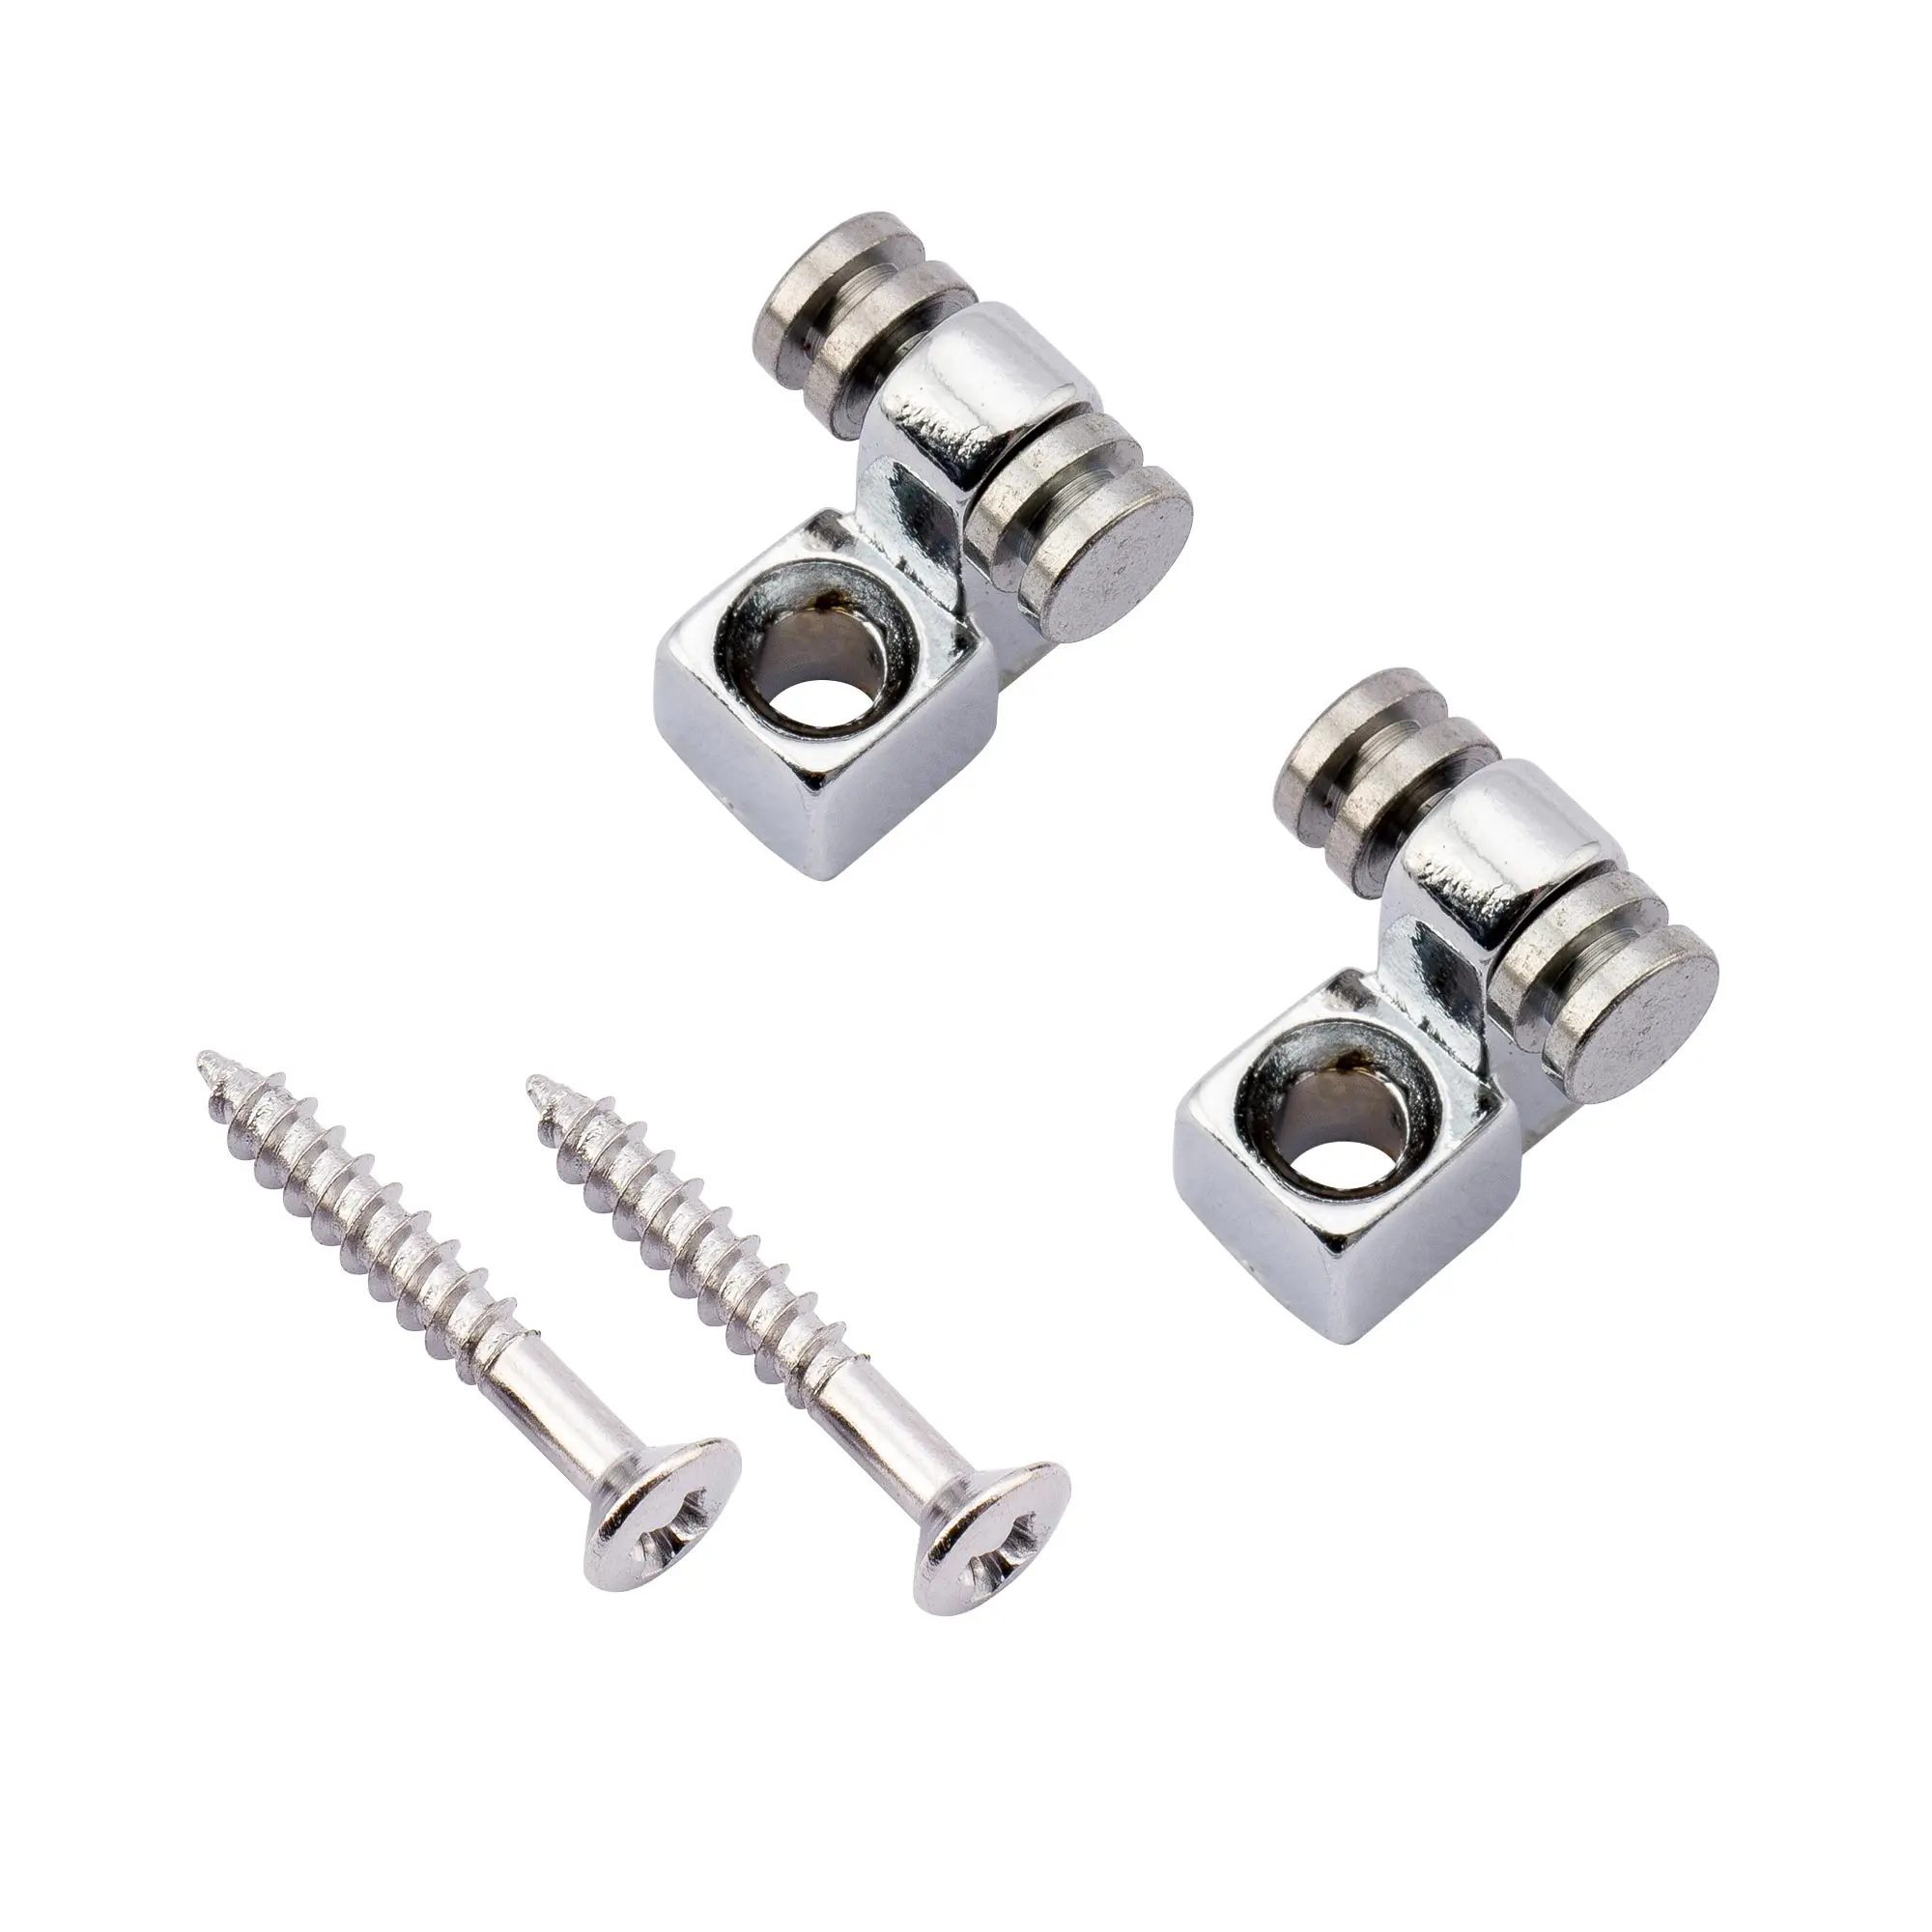 Set of 2 Pro Metal Roller String Trees Retainers Guides for Strat/Tele Style Electric Guitar Chrome 